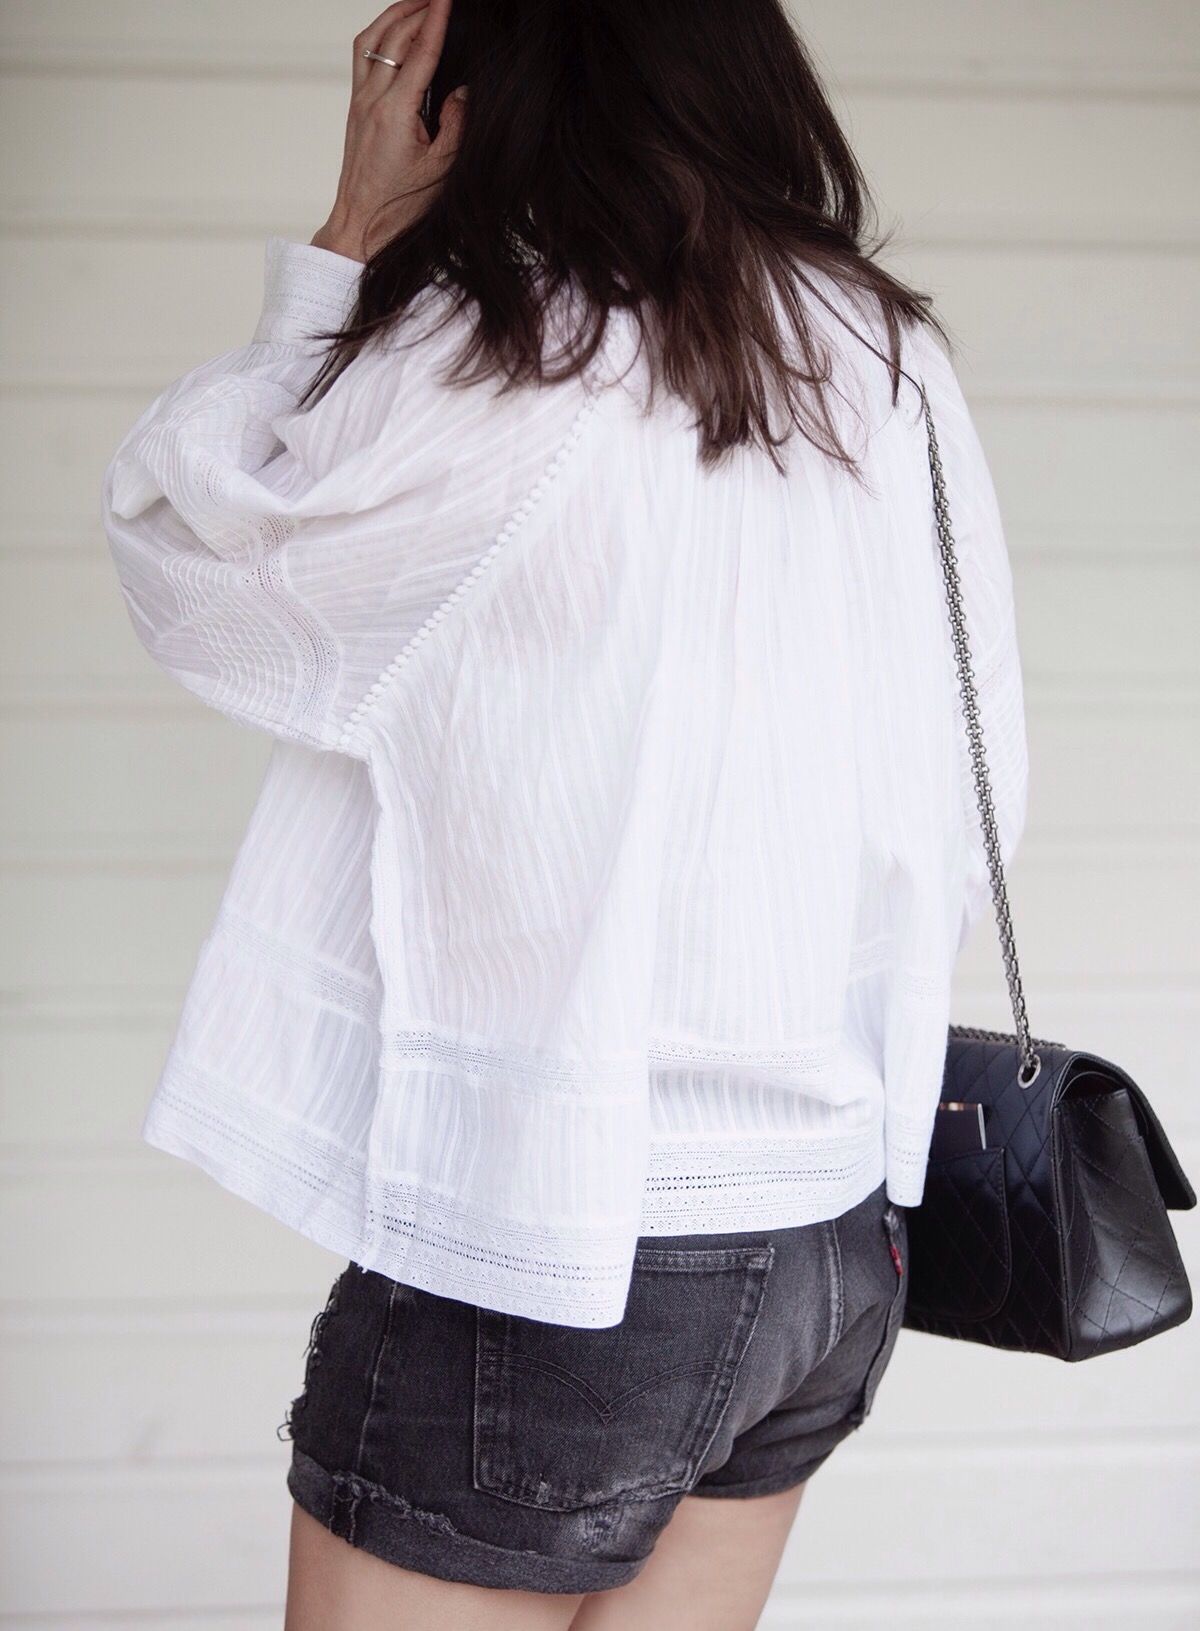 Zadig Voltaire top white skulls BlogForShops for Perfectlybasics.com streetstyle look of the day spring summer styling